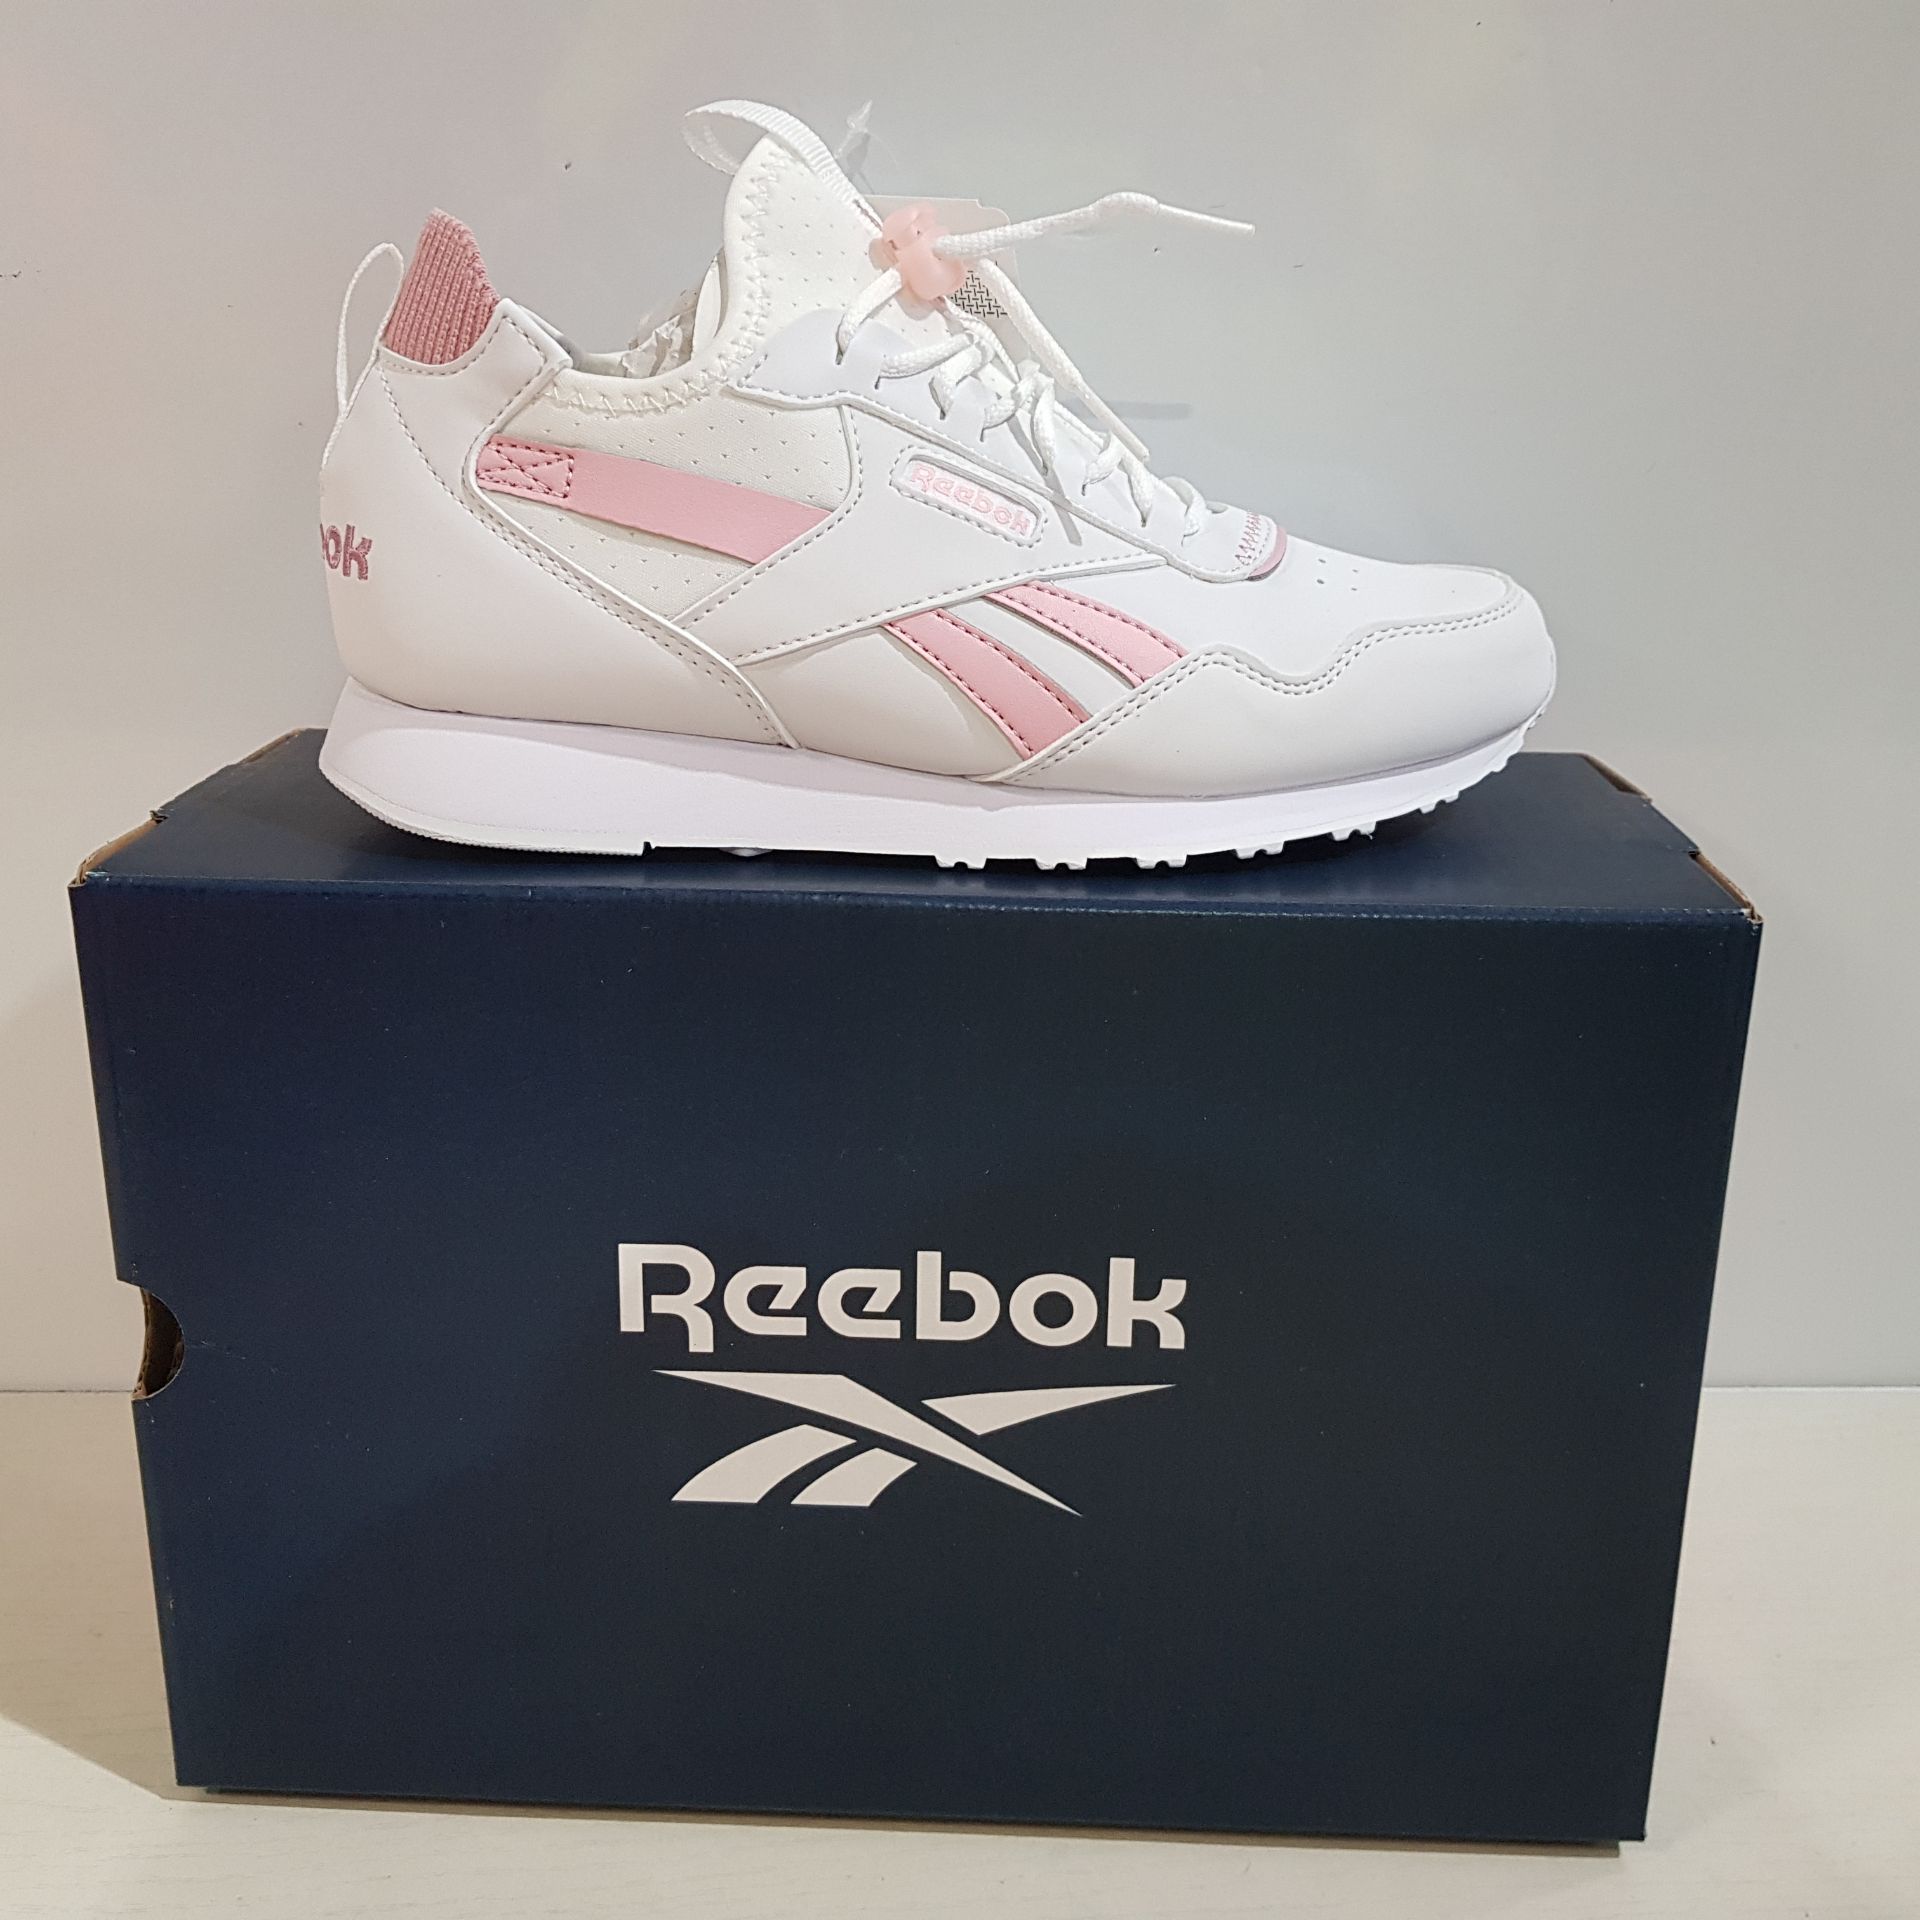 12 X BRAND NEW & BOXED REEBOK ROYAL GLIDE AC RUNNING SHOES IN PINK AND WHITE - ALL IN SIZE UK 3 &